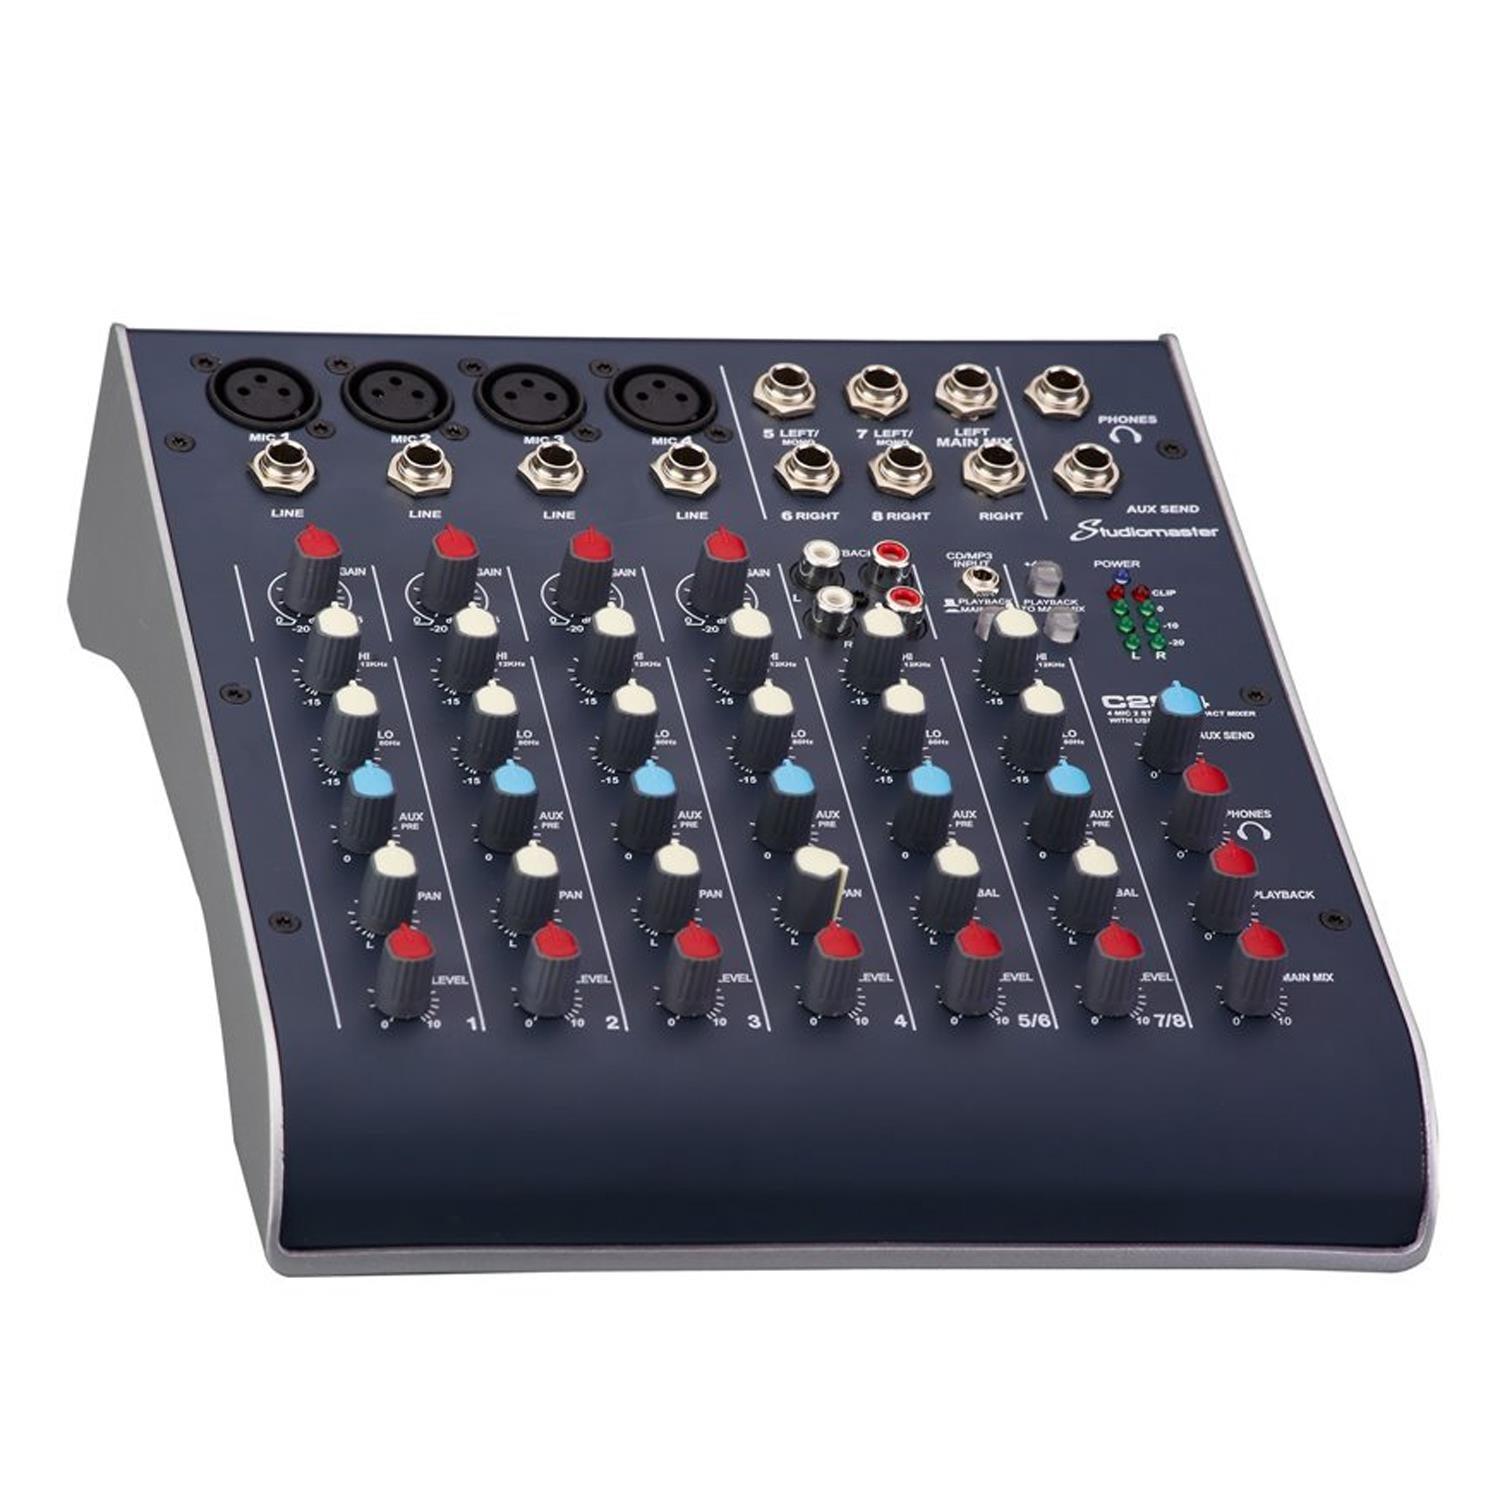 Studiomaster C2-4 4 Channel Compact Mixer - DY Pro Audio